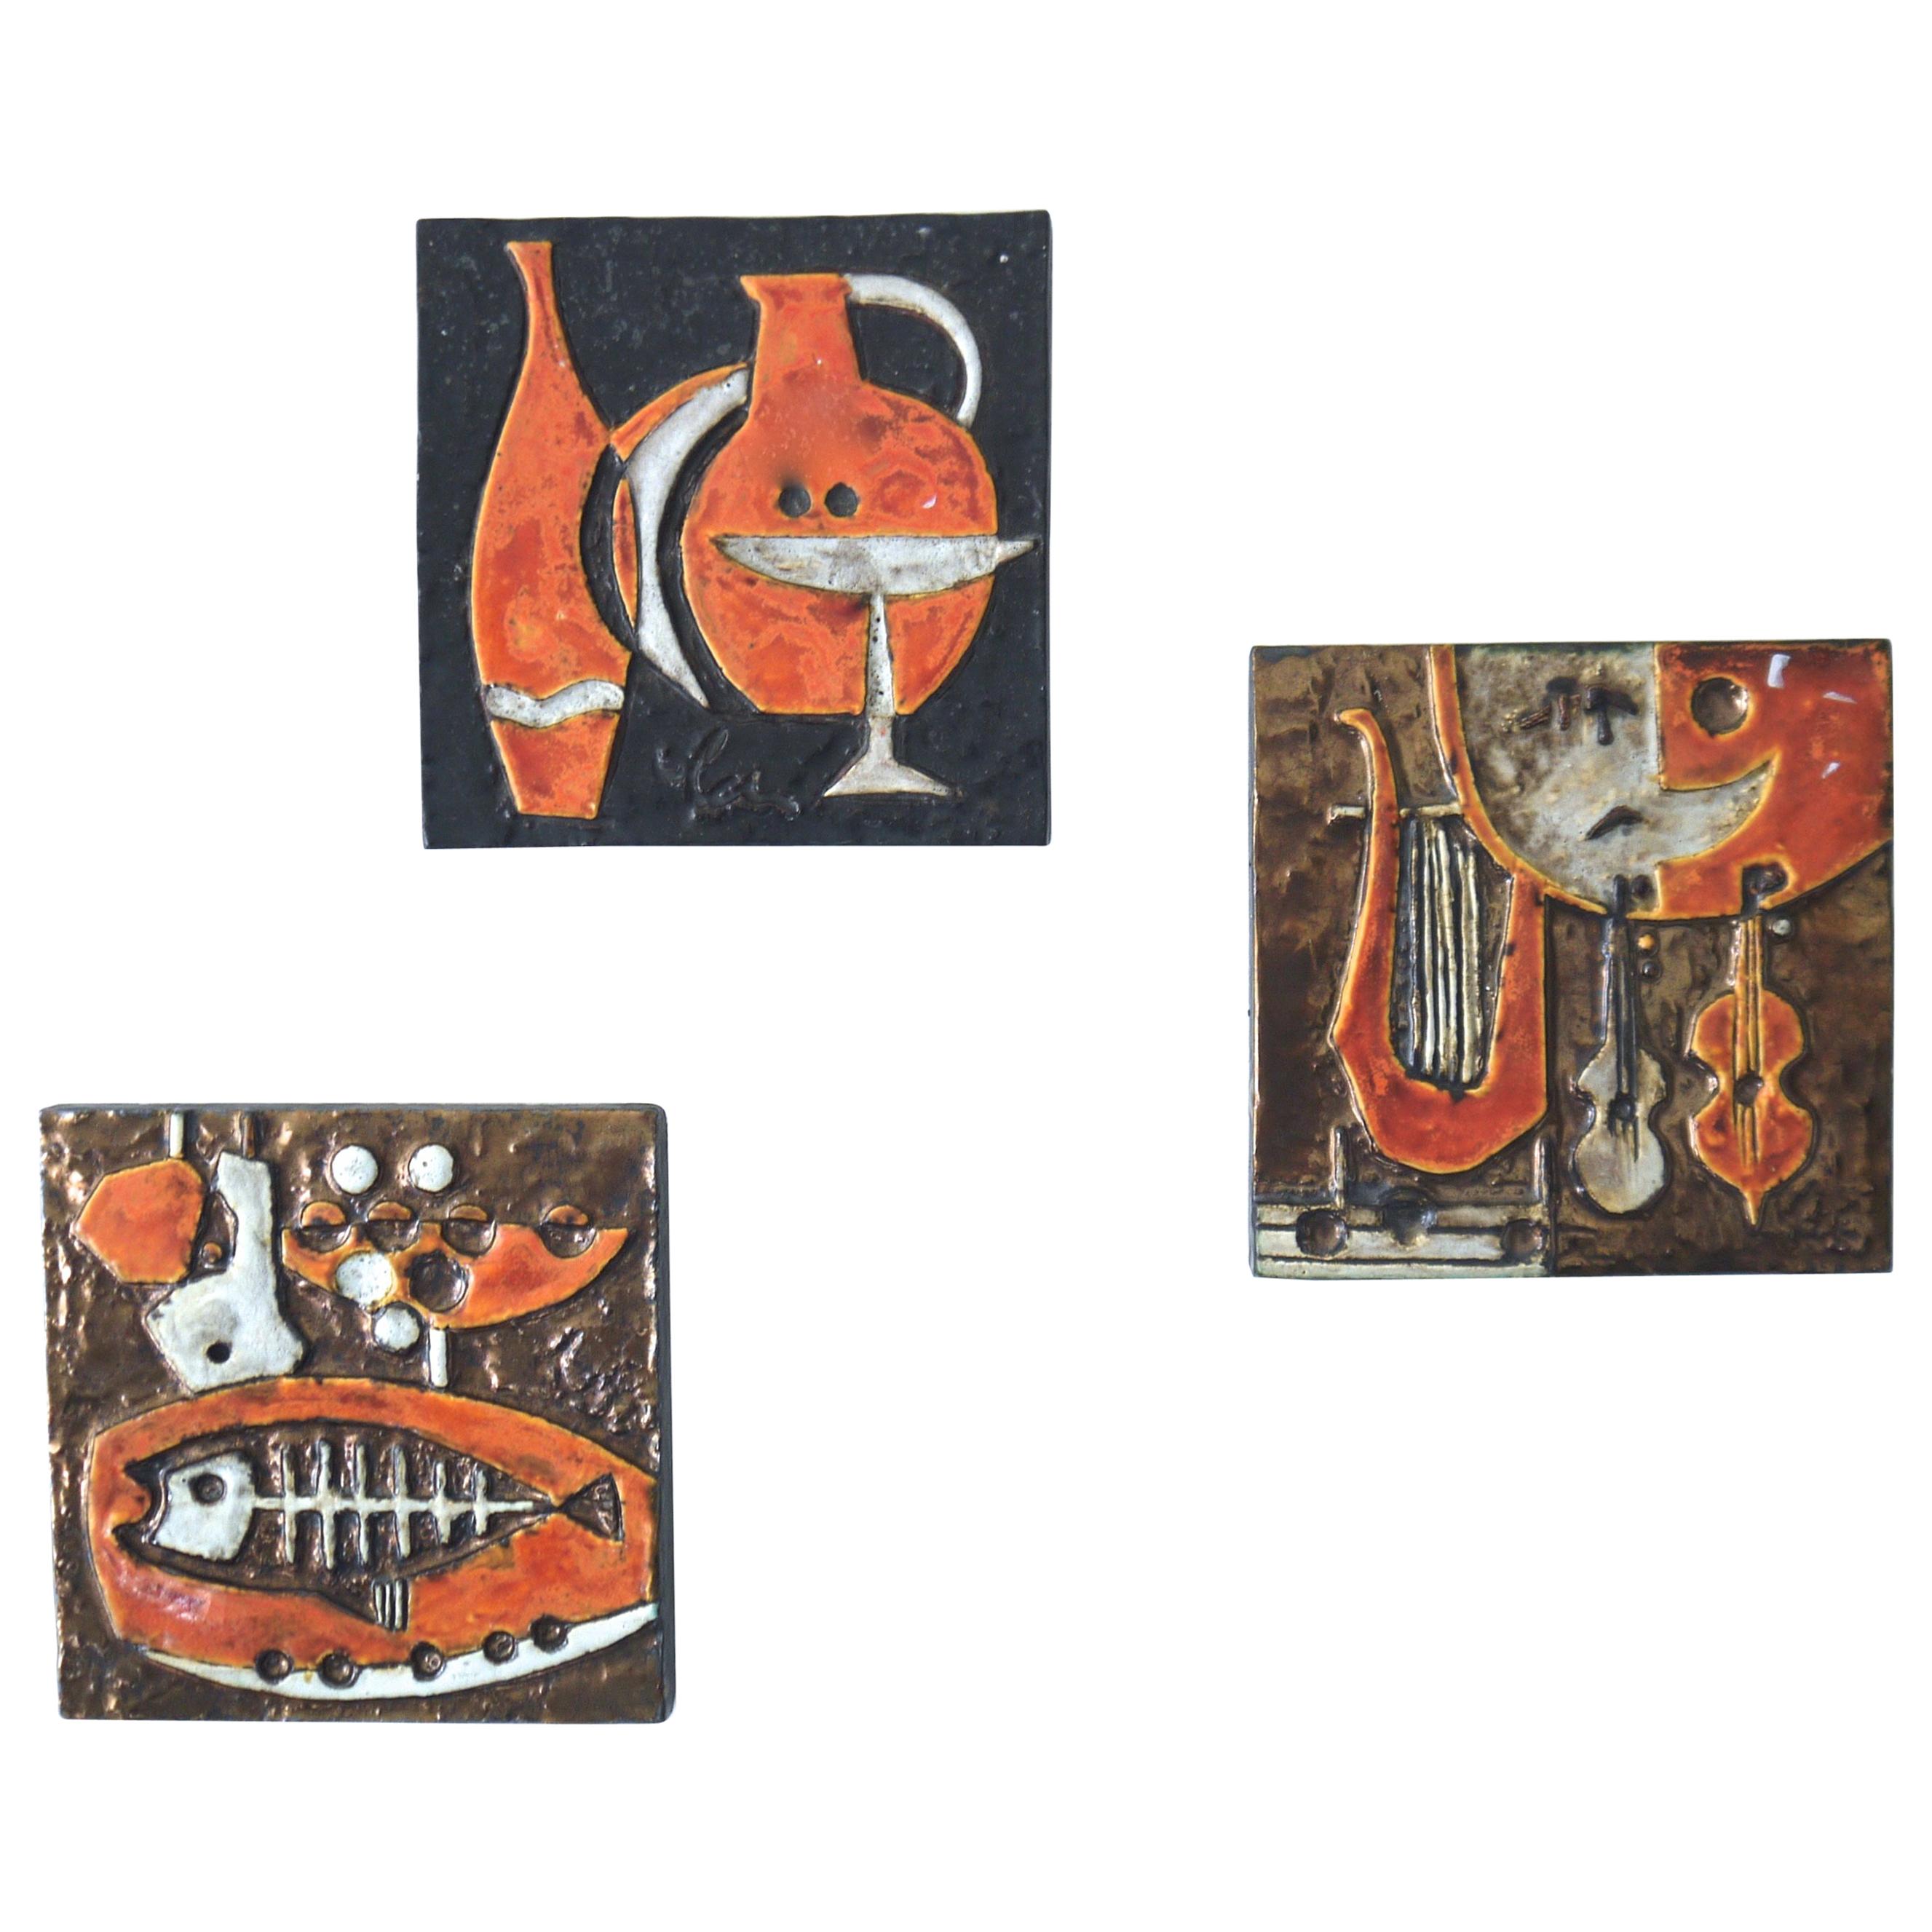 Modernist Ceramic Wall Plaques, Set of Three by Helmut Schaffenacker Late 1950s For Sale